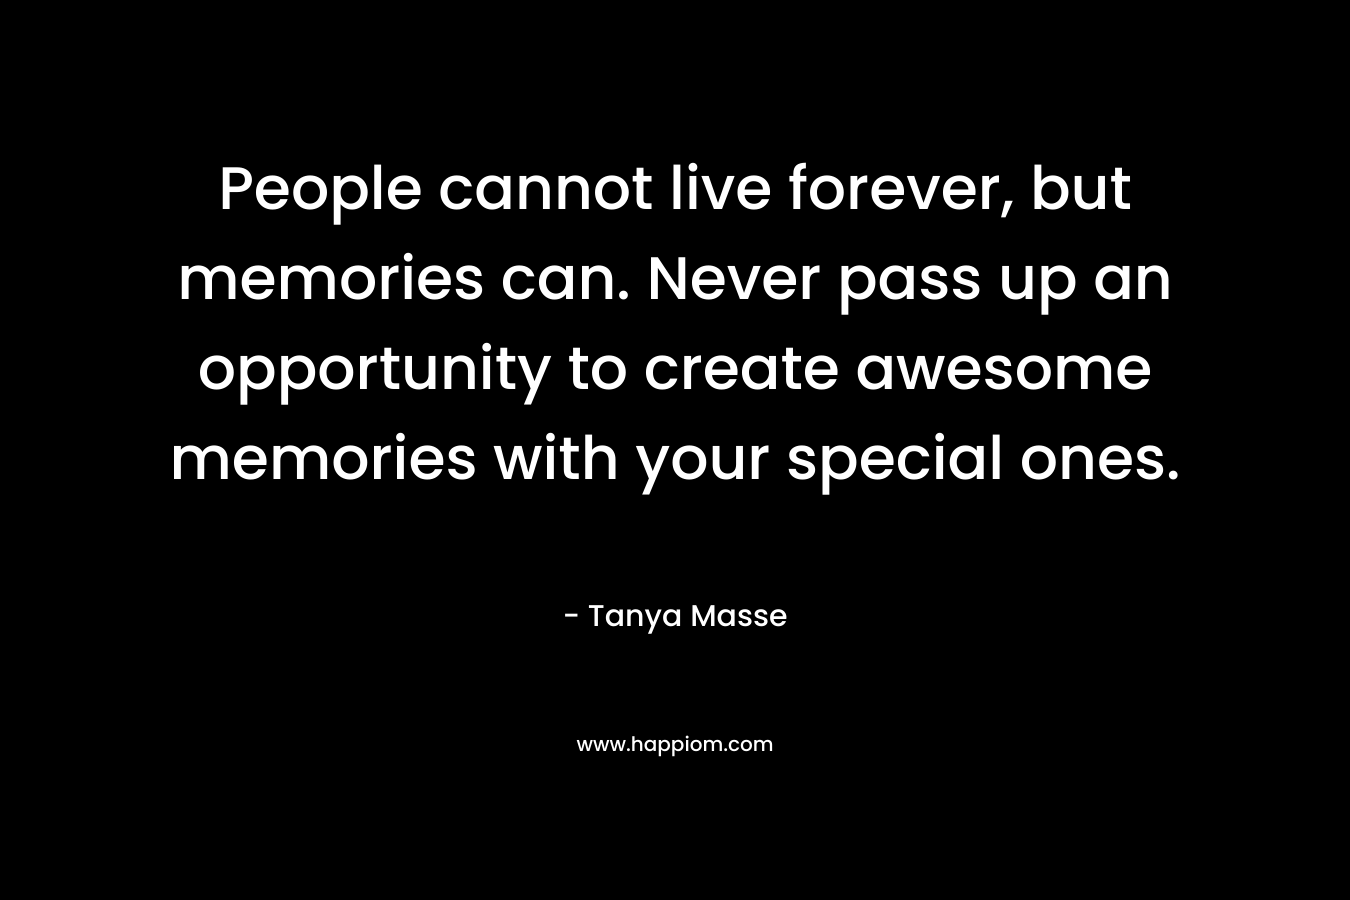 People cannot live forever, but memories can. Never pass up an opportunity to create awesome memories with your special ones.